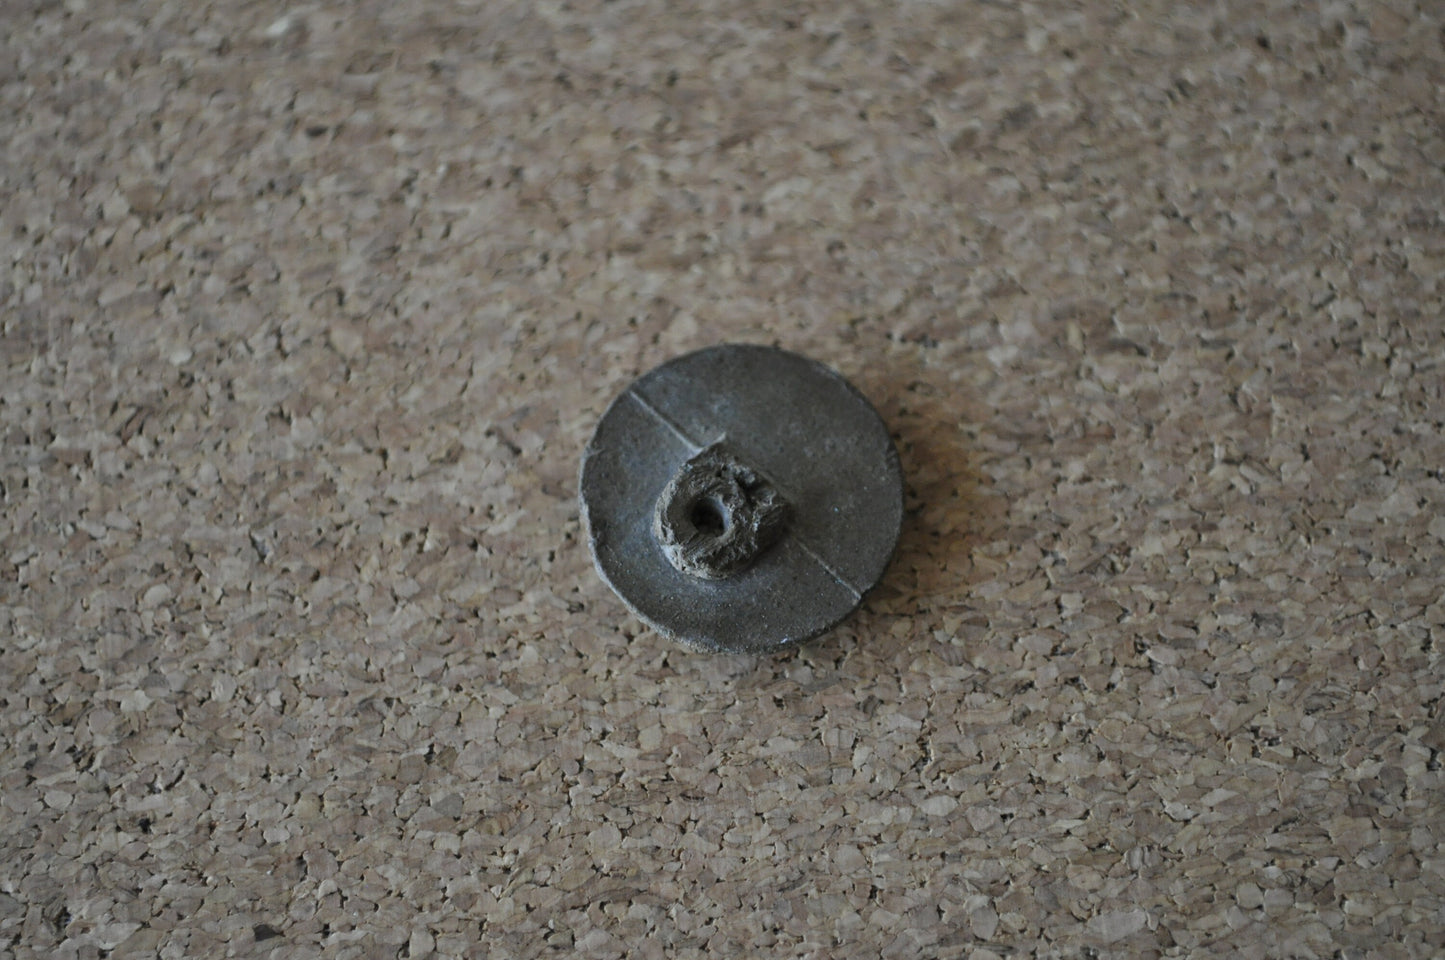 Old Copper / Brass Vintage Buttons and Pins Found metal detecting